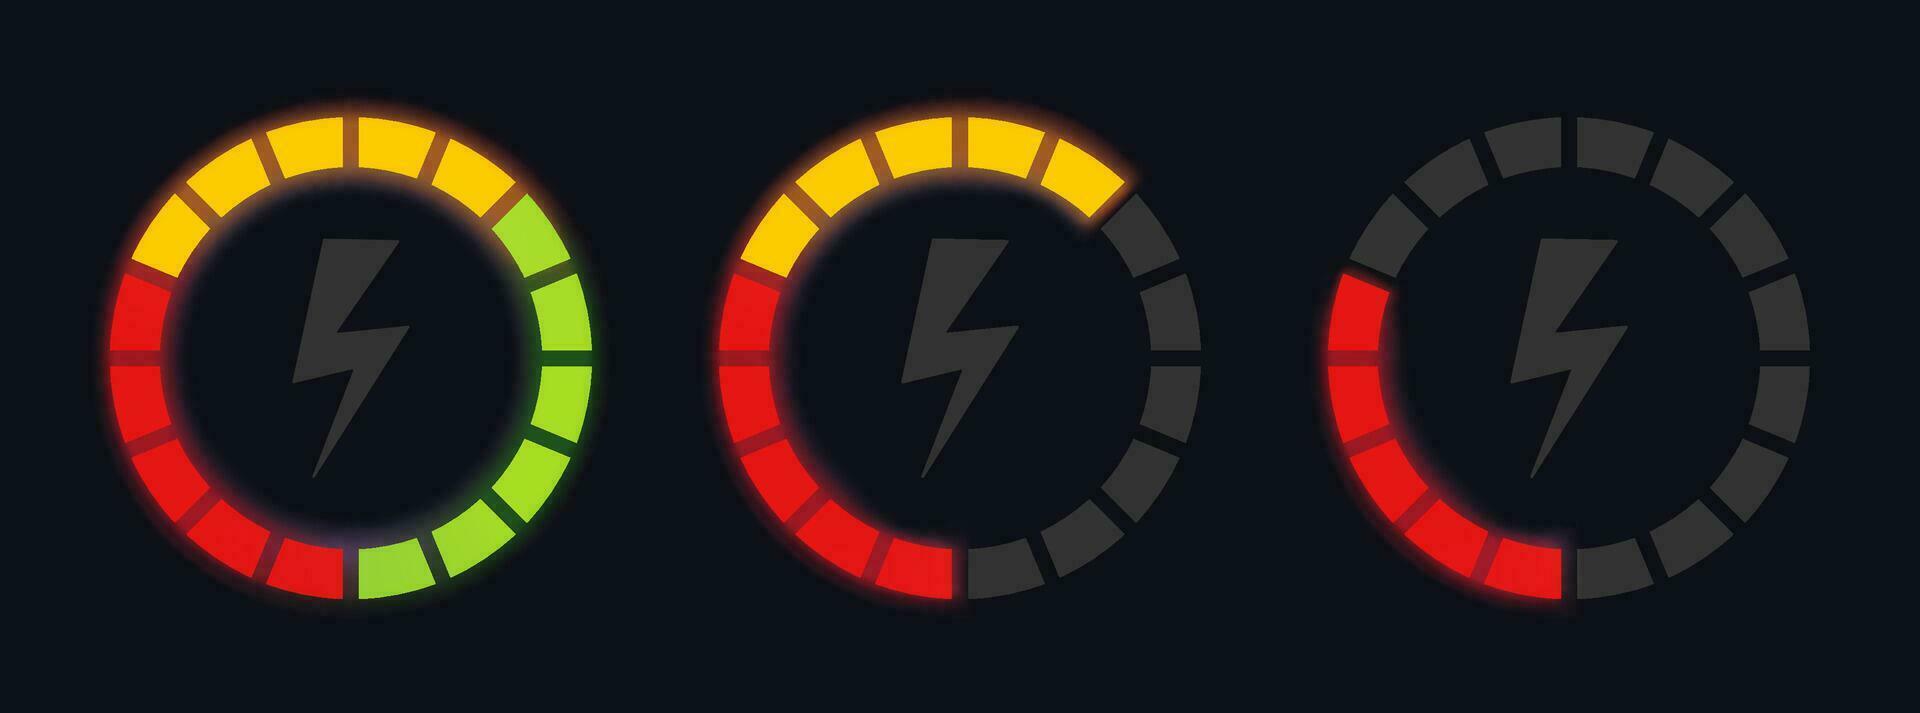 Vector illustration of a power level indicator. Electric fuel level indicator. Loading circle with percentage levels. Meter concept with a lightning sign. Modern energy meter